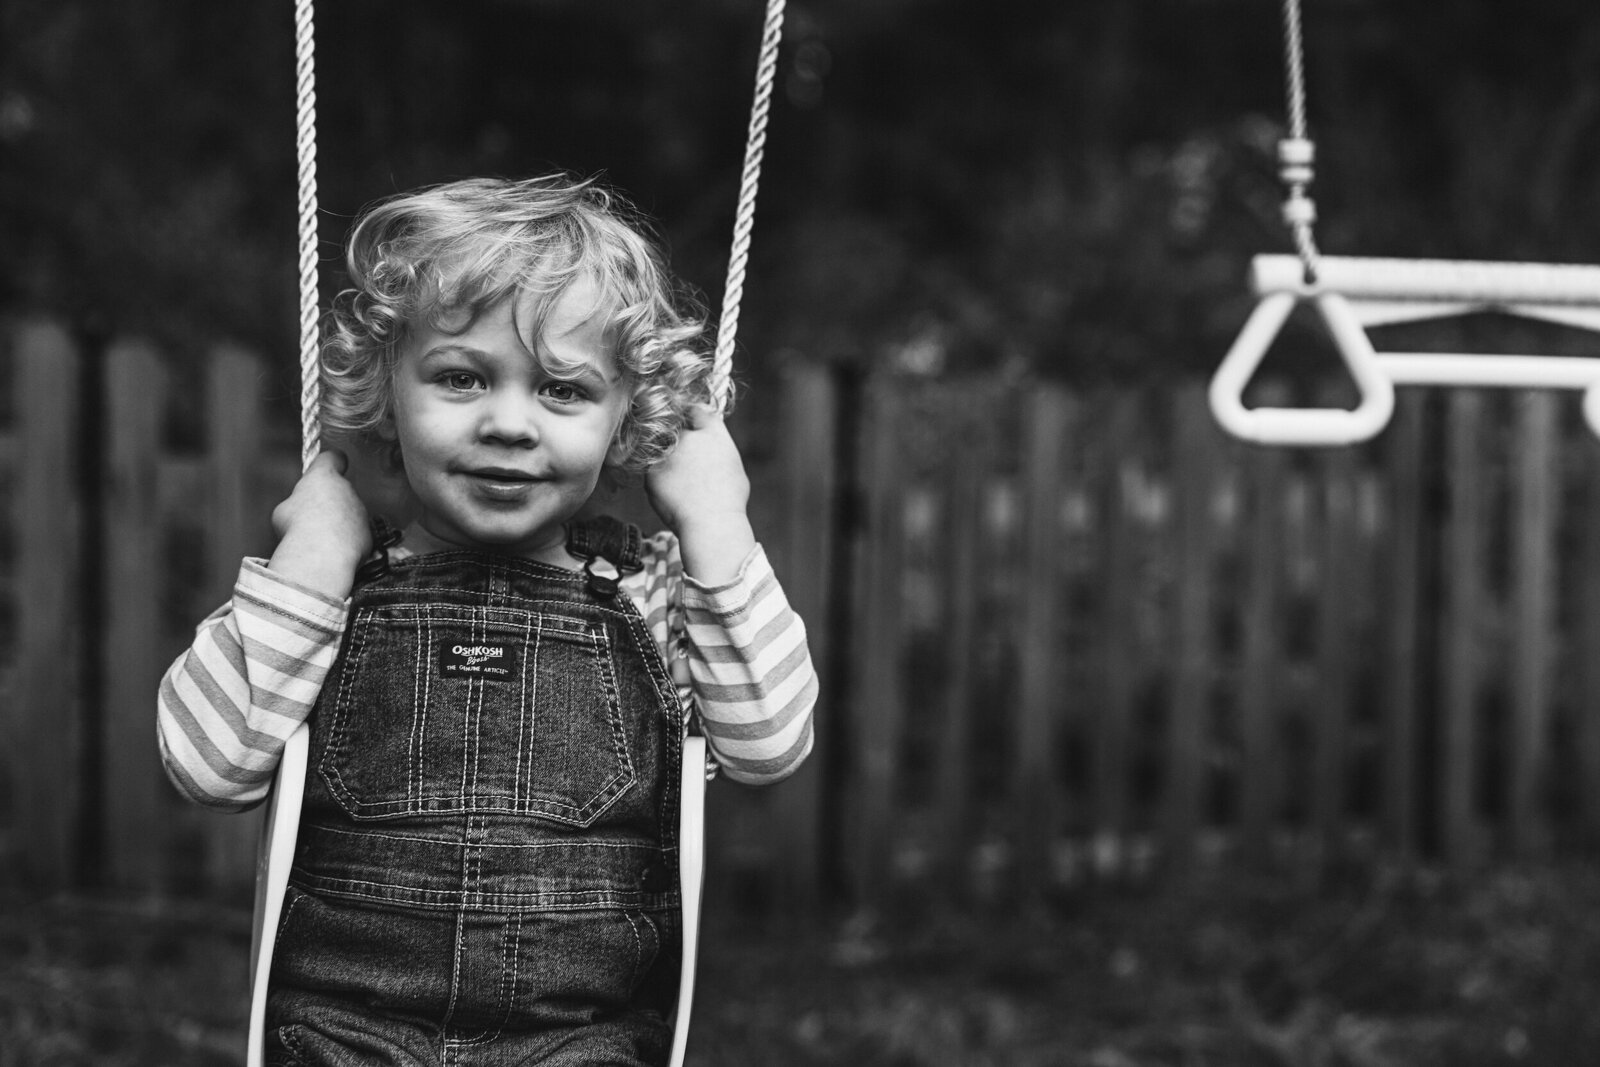 A young boy swings in a playyard playground for a black and white photo.